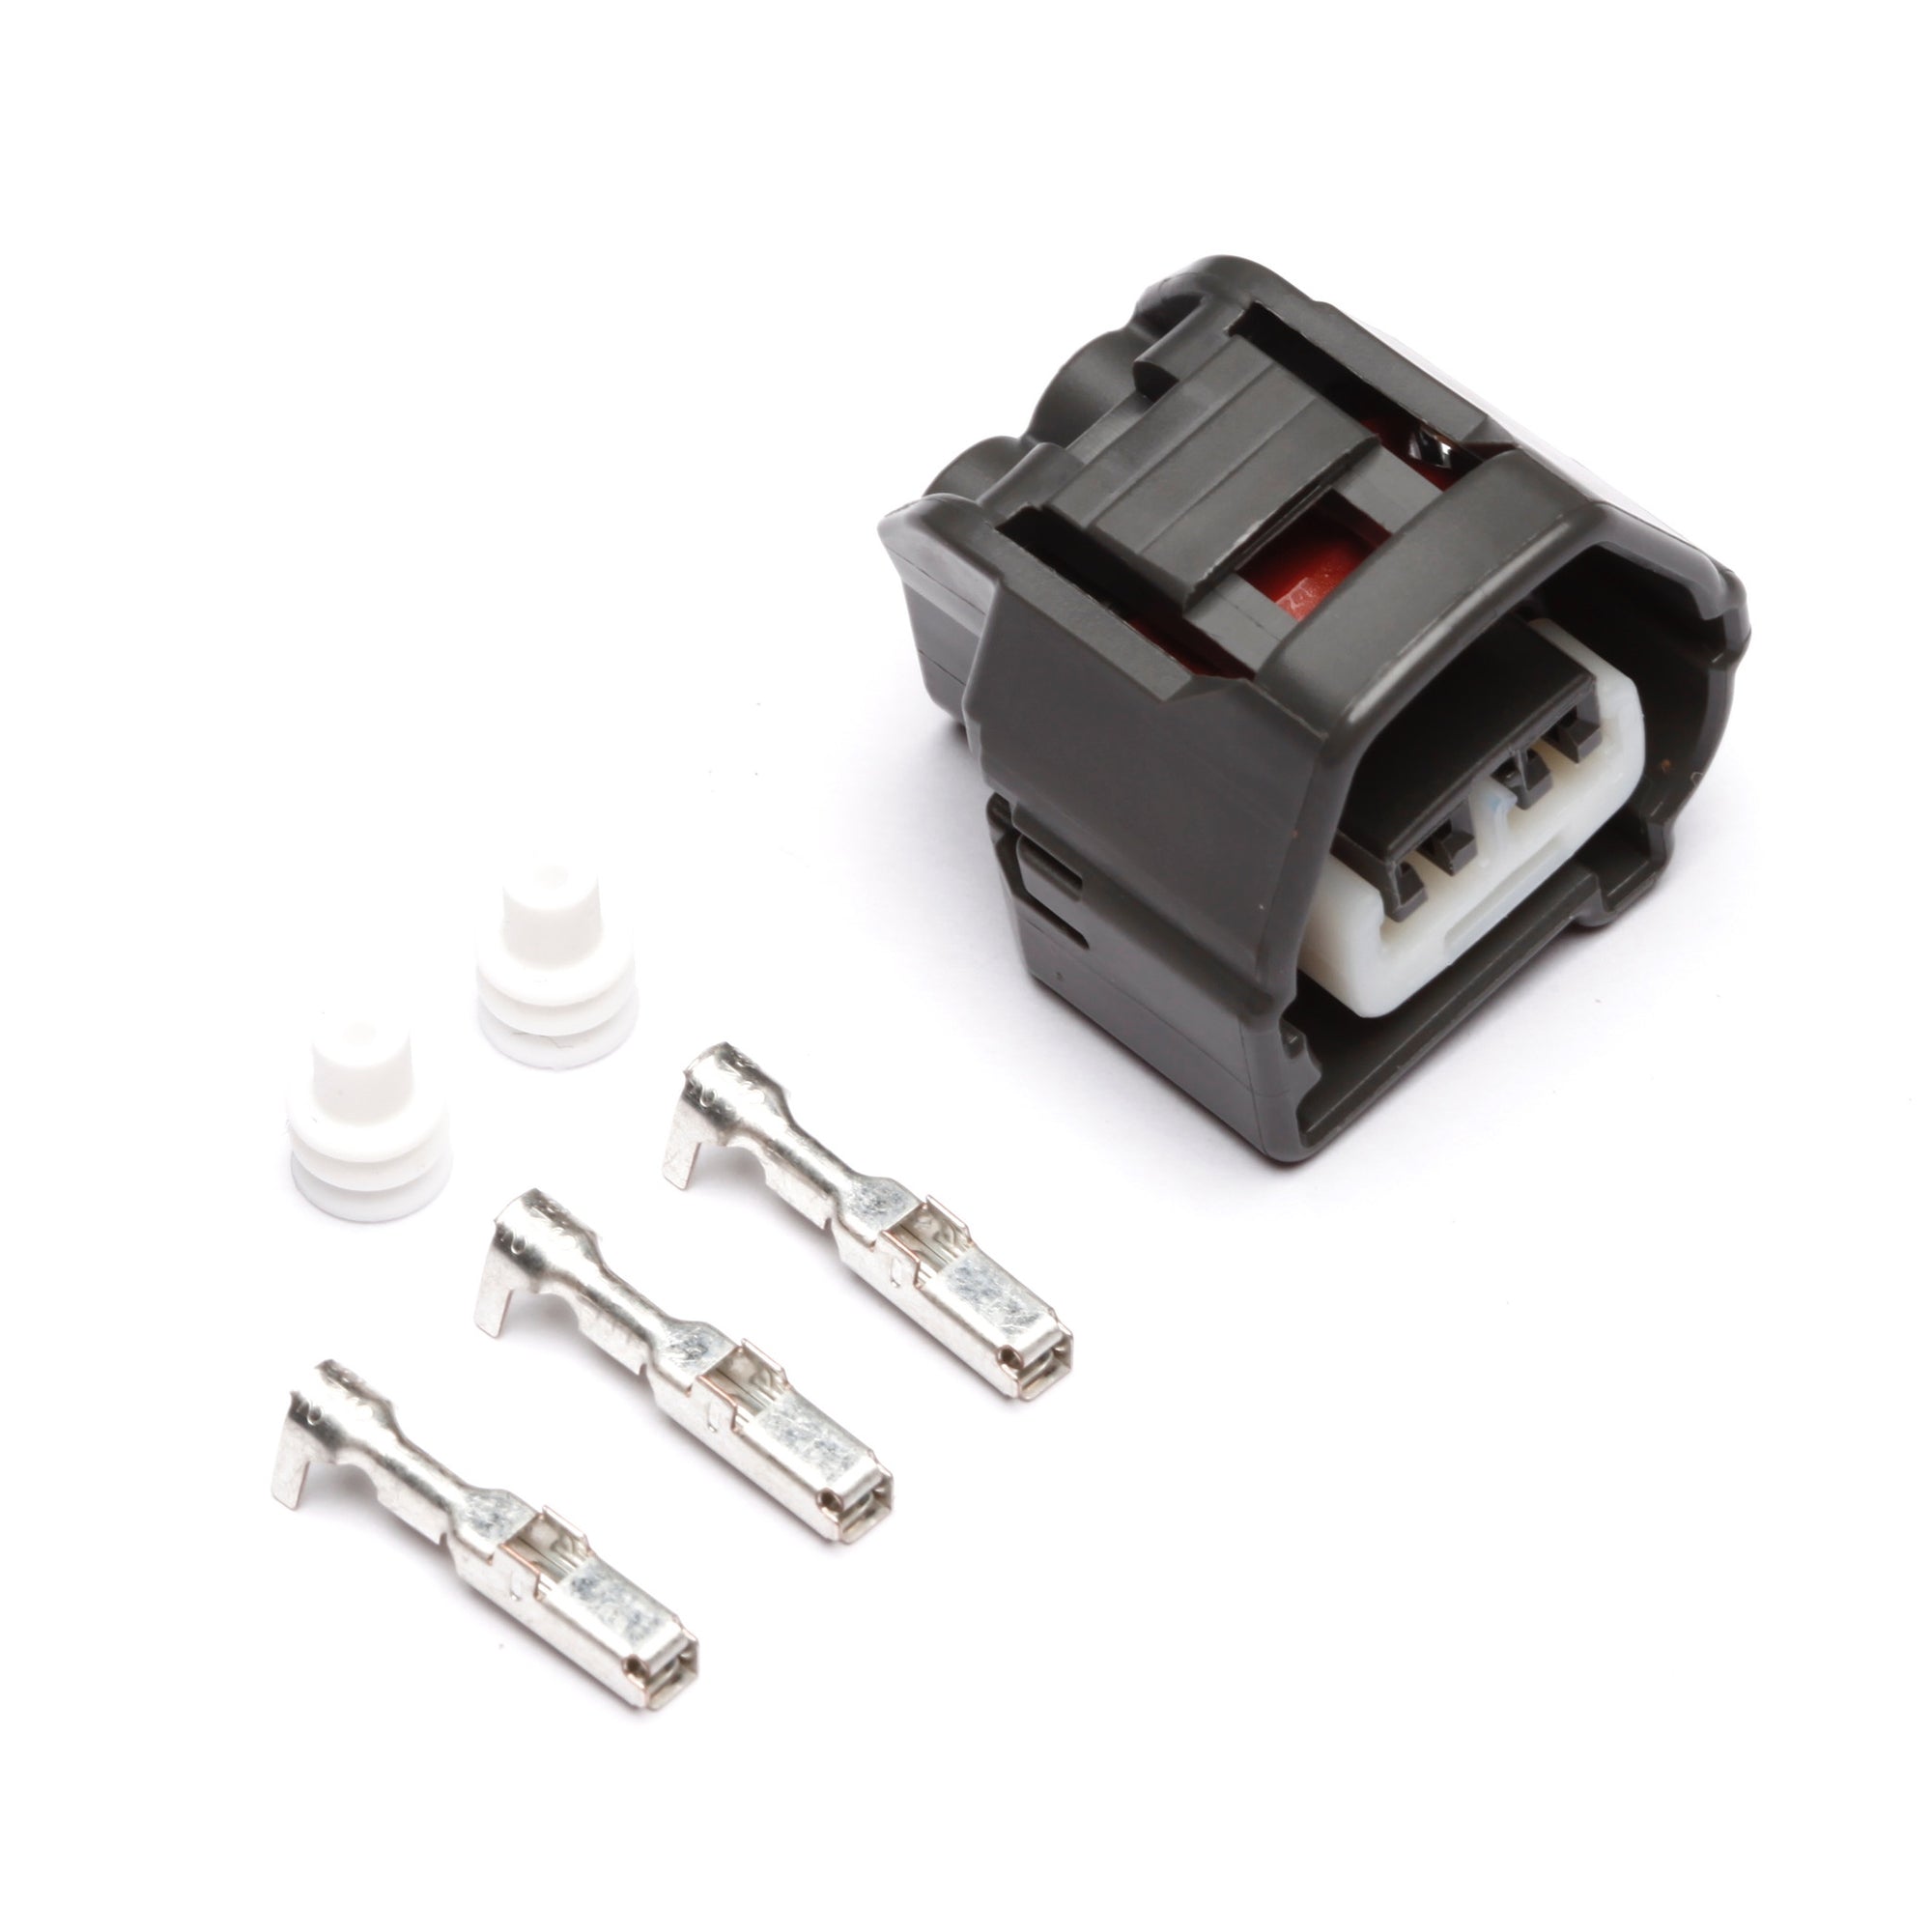 Connectors - Toyota 2-Position Connector Kit